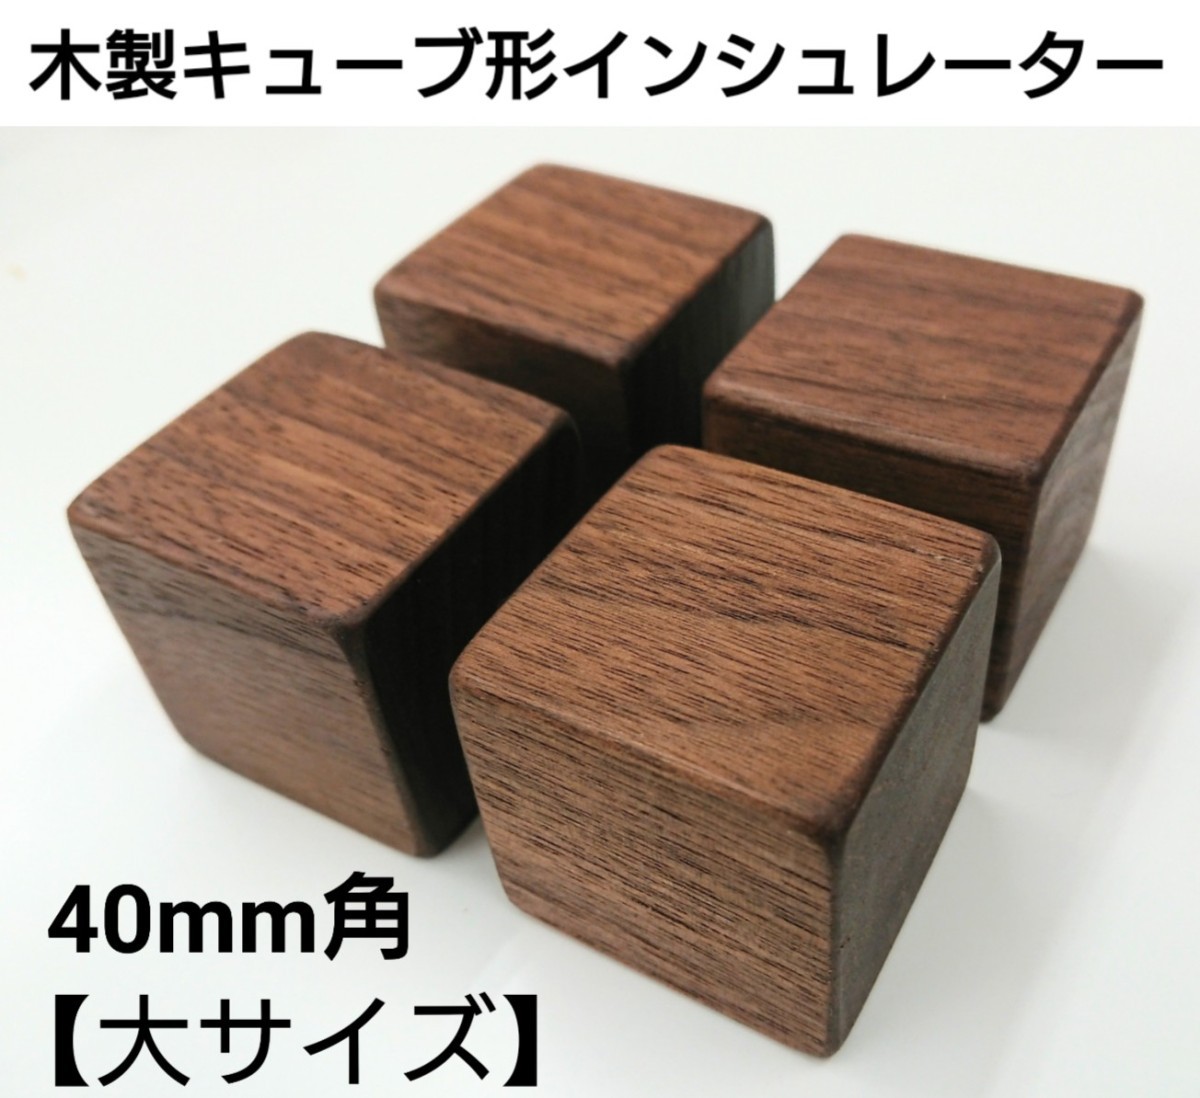  insulator wooden Cube shape speaker natural wood large size 40mm angle 4 piece entering audio equipment amplifier sound quality piano 